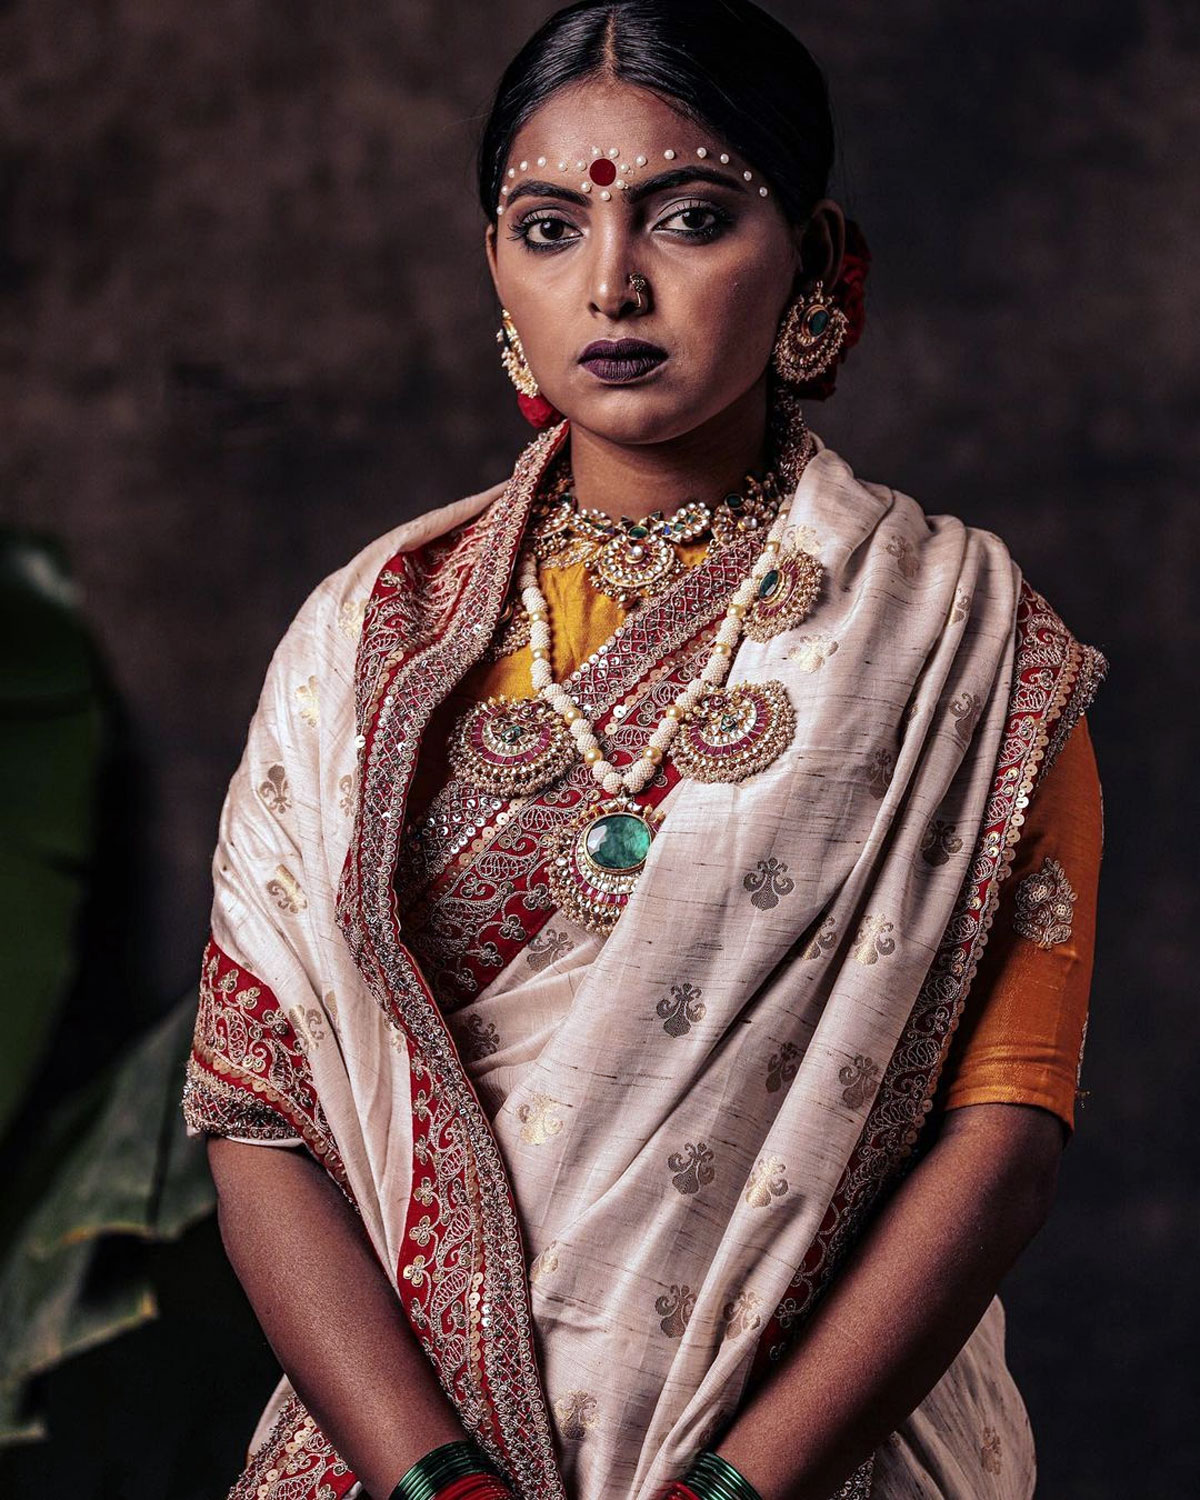 Will you wear a sari every day? - Rediff.com